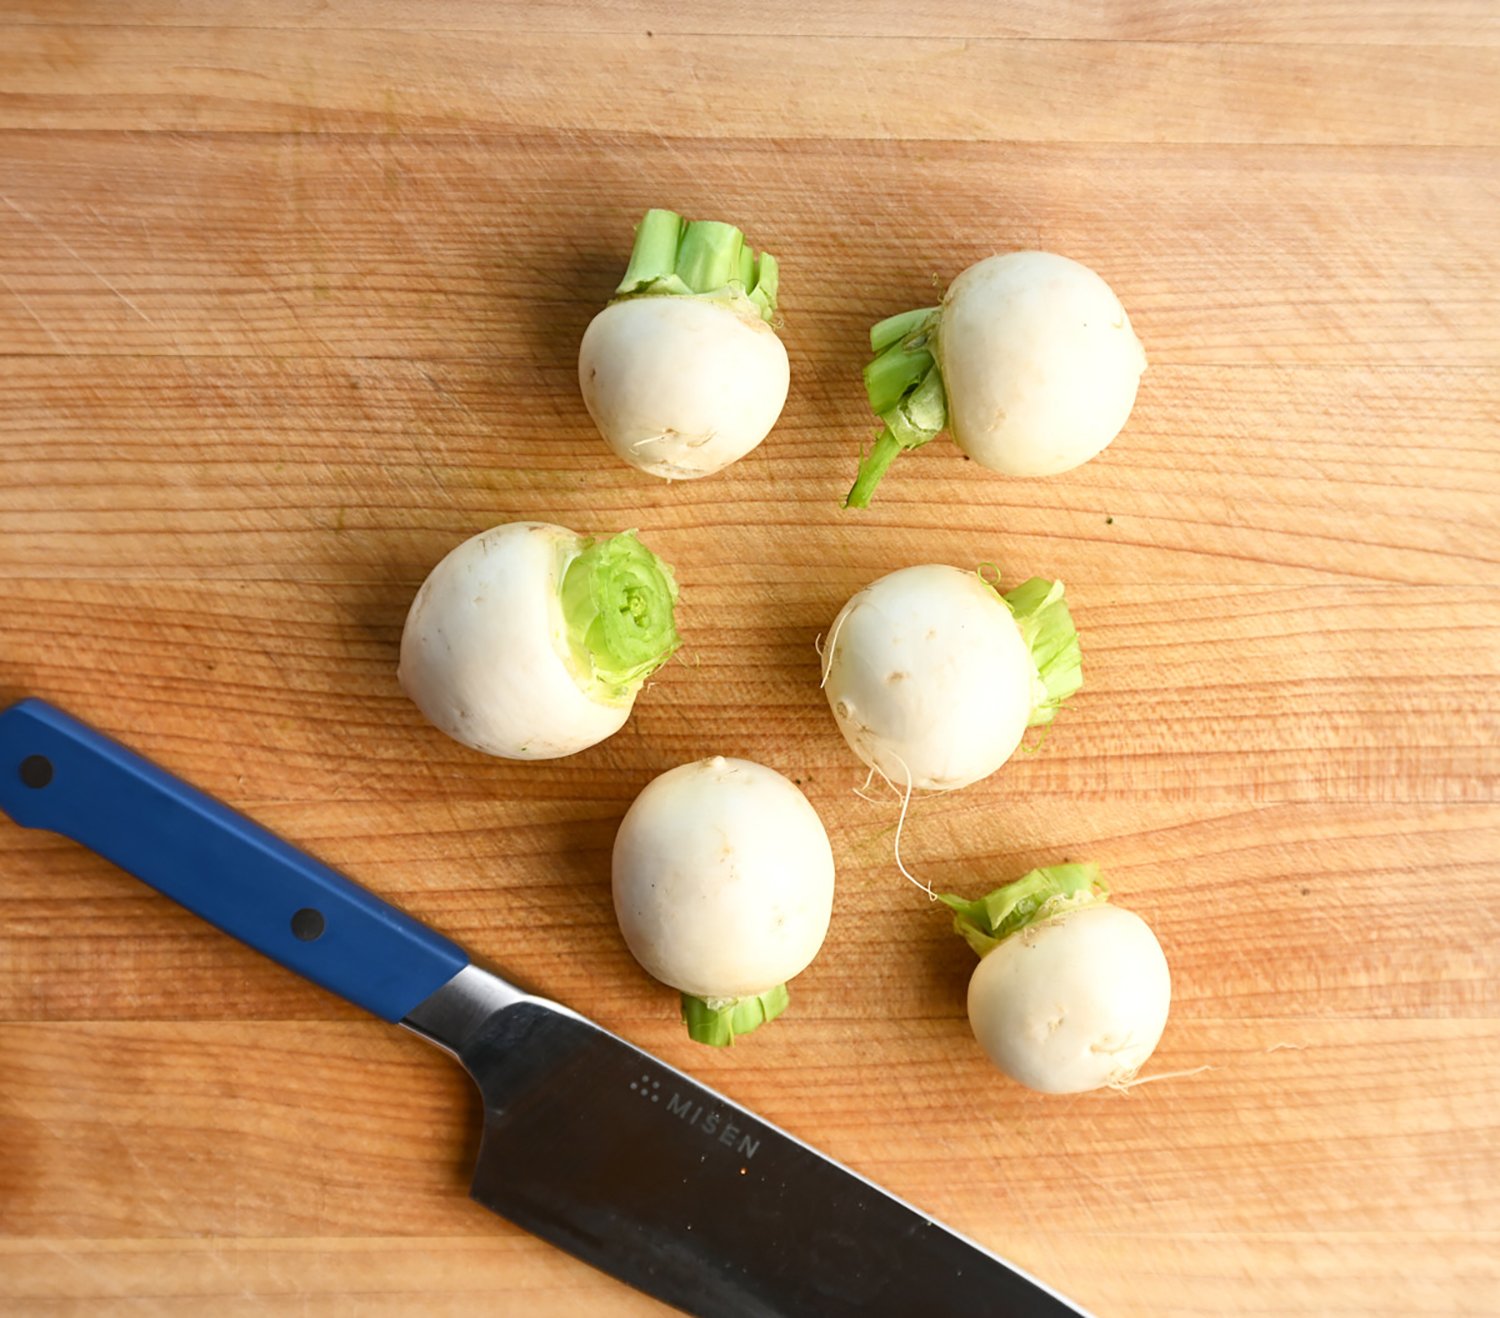 six turnip without greens on a wooden cutting board, next to a knife